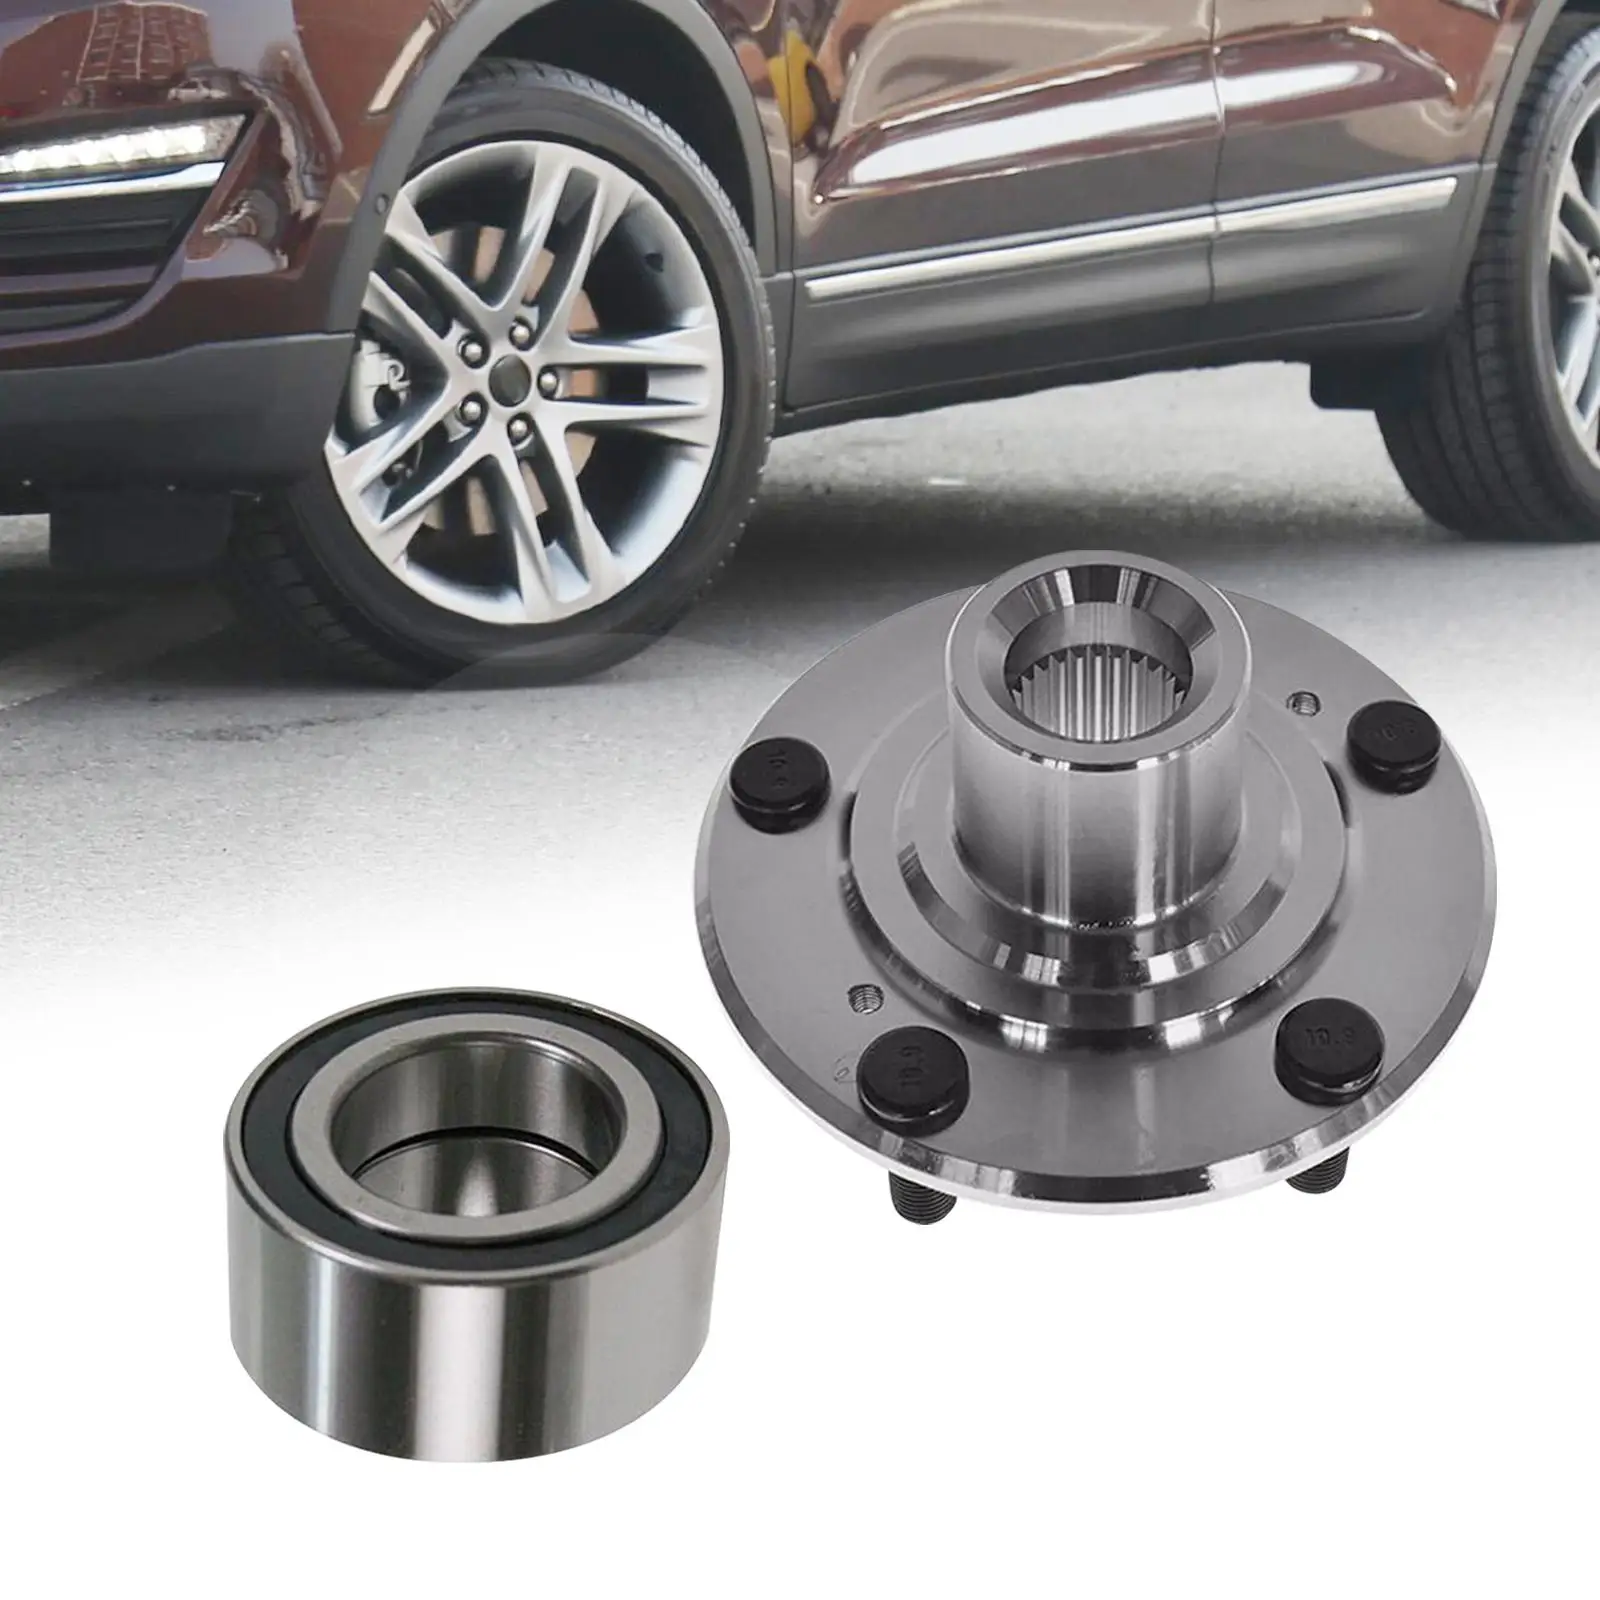 Front Wheel Hub Bearing Set WH188 Nt510110 Durable Easy Installation Front Left or Right Replaces for Lincoln Mkc 2015-2019